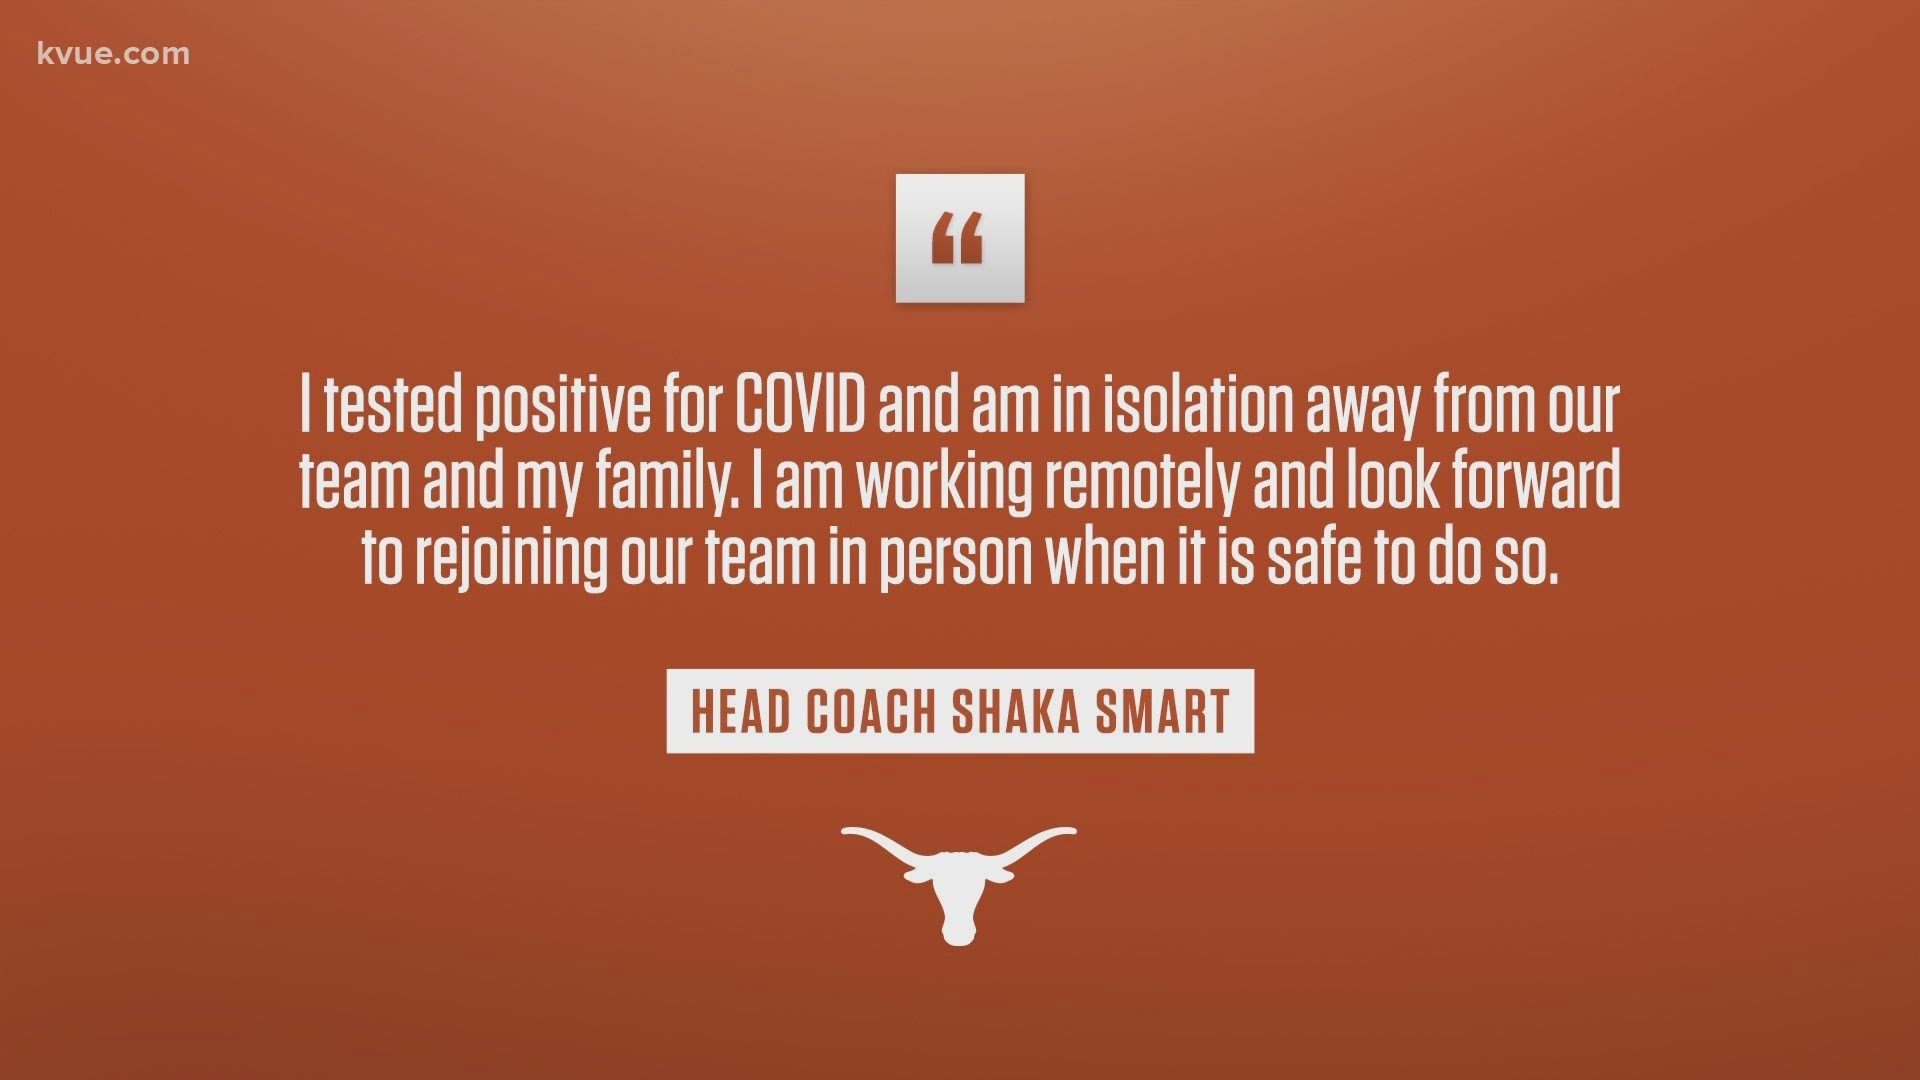 Men's basketball coach Shaka Smart recently tested positive for the coronavirus. He said he is in isolation from the team and his family.